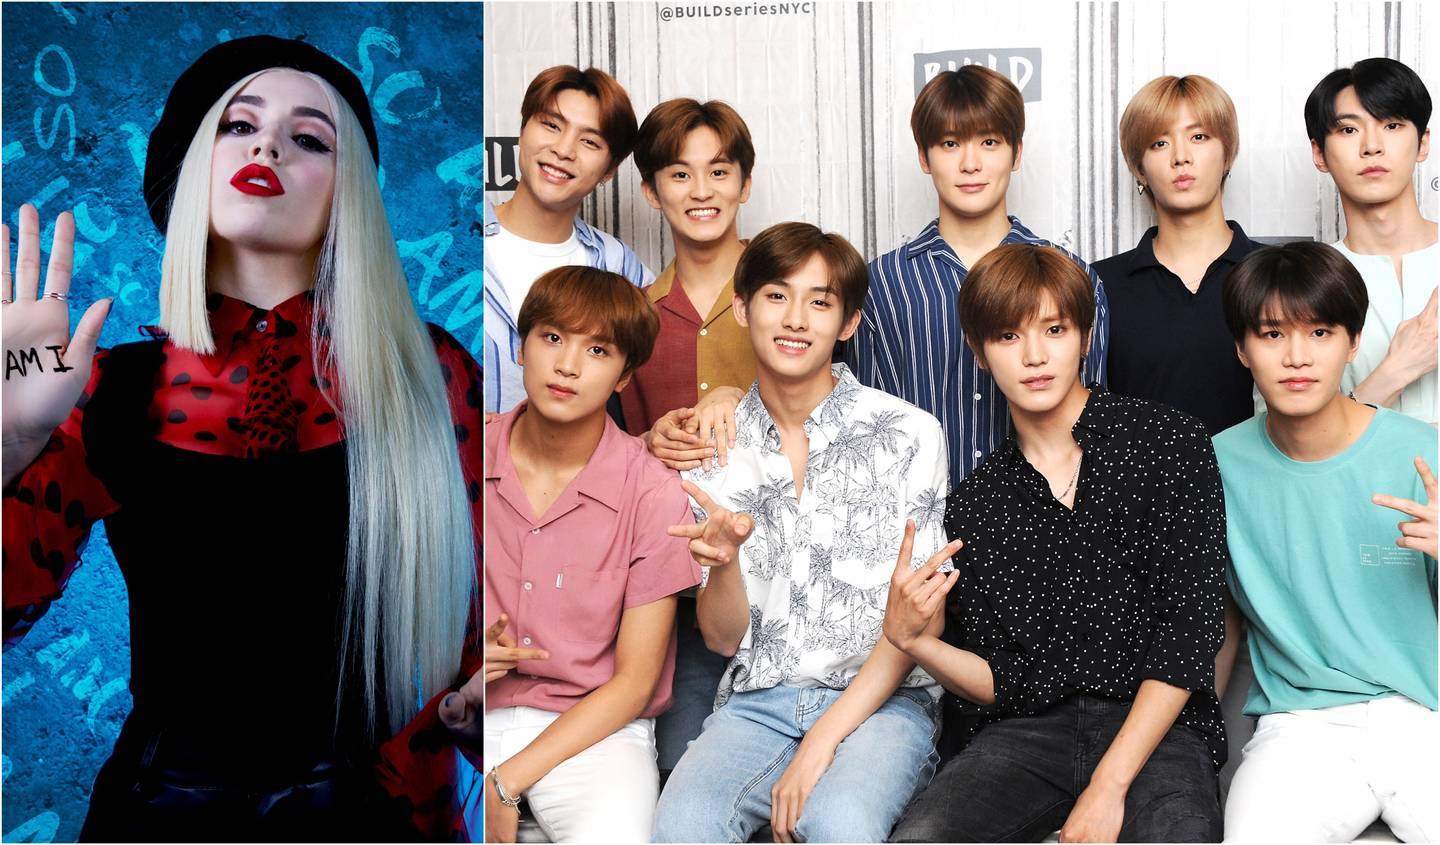 Ava Max And NCT 127's 'So Am I' Remix Is An Irresistible Misfit Anthem